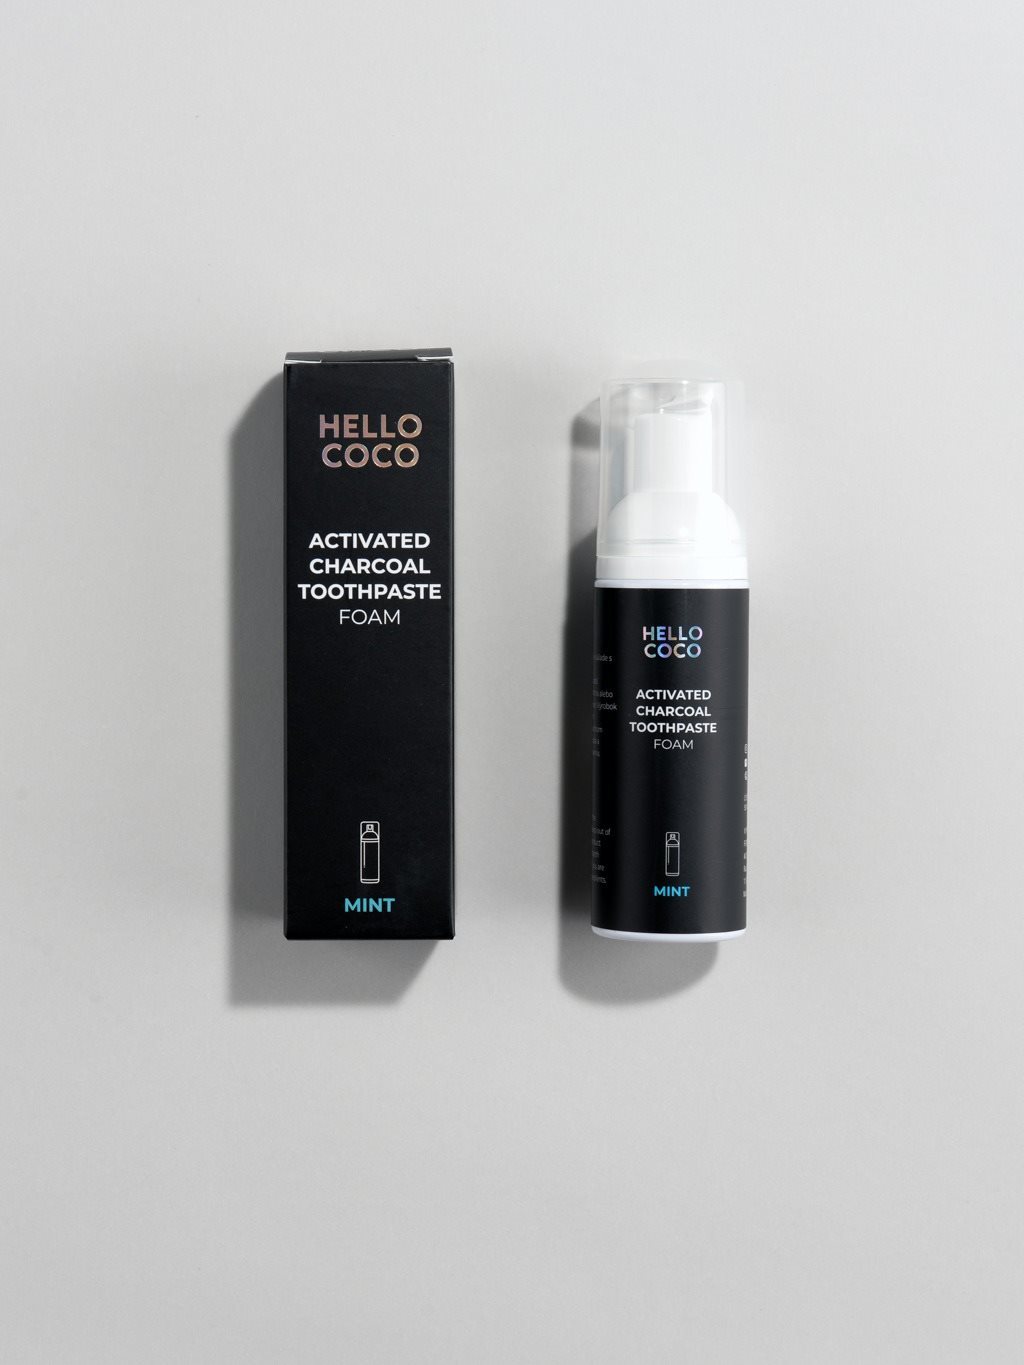 Fogkrém HELLO COCO Activated Charcoal Toothpaste foam 50 ml